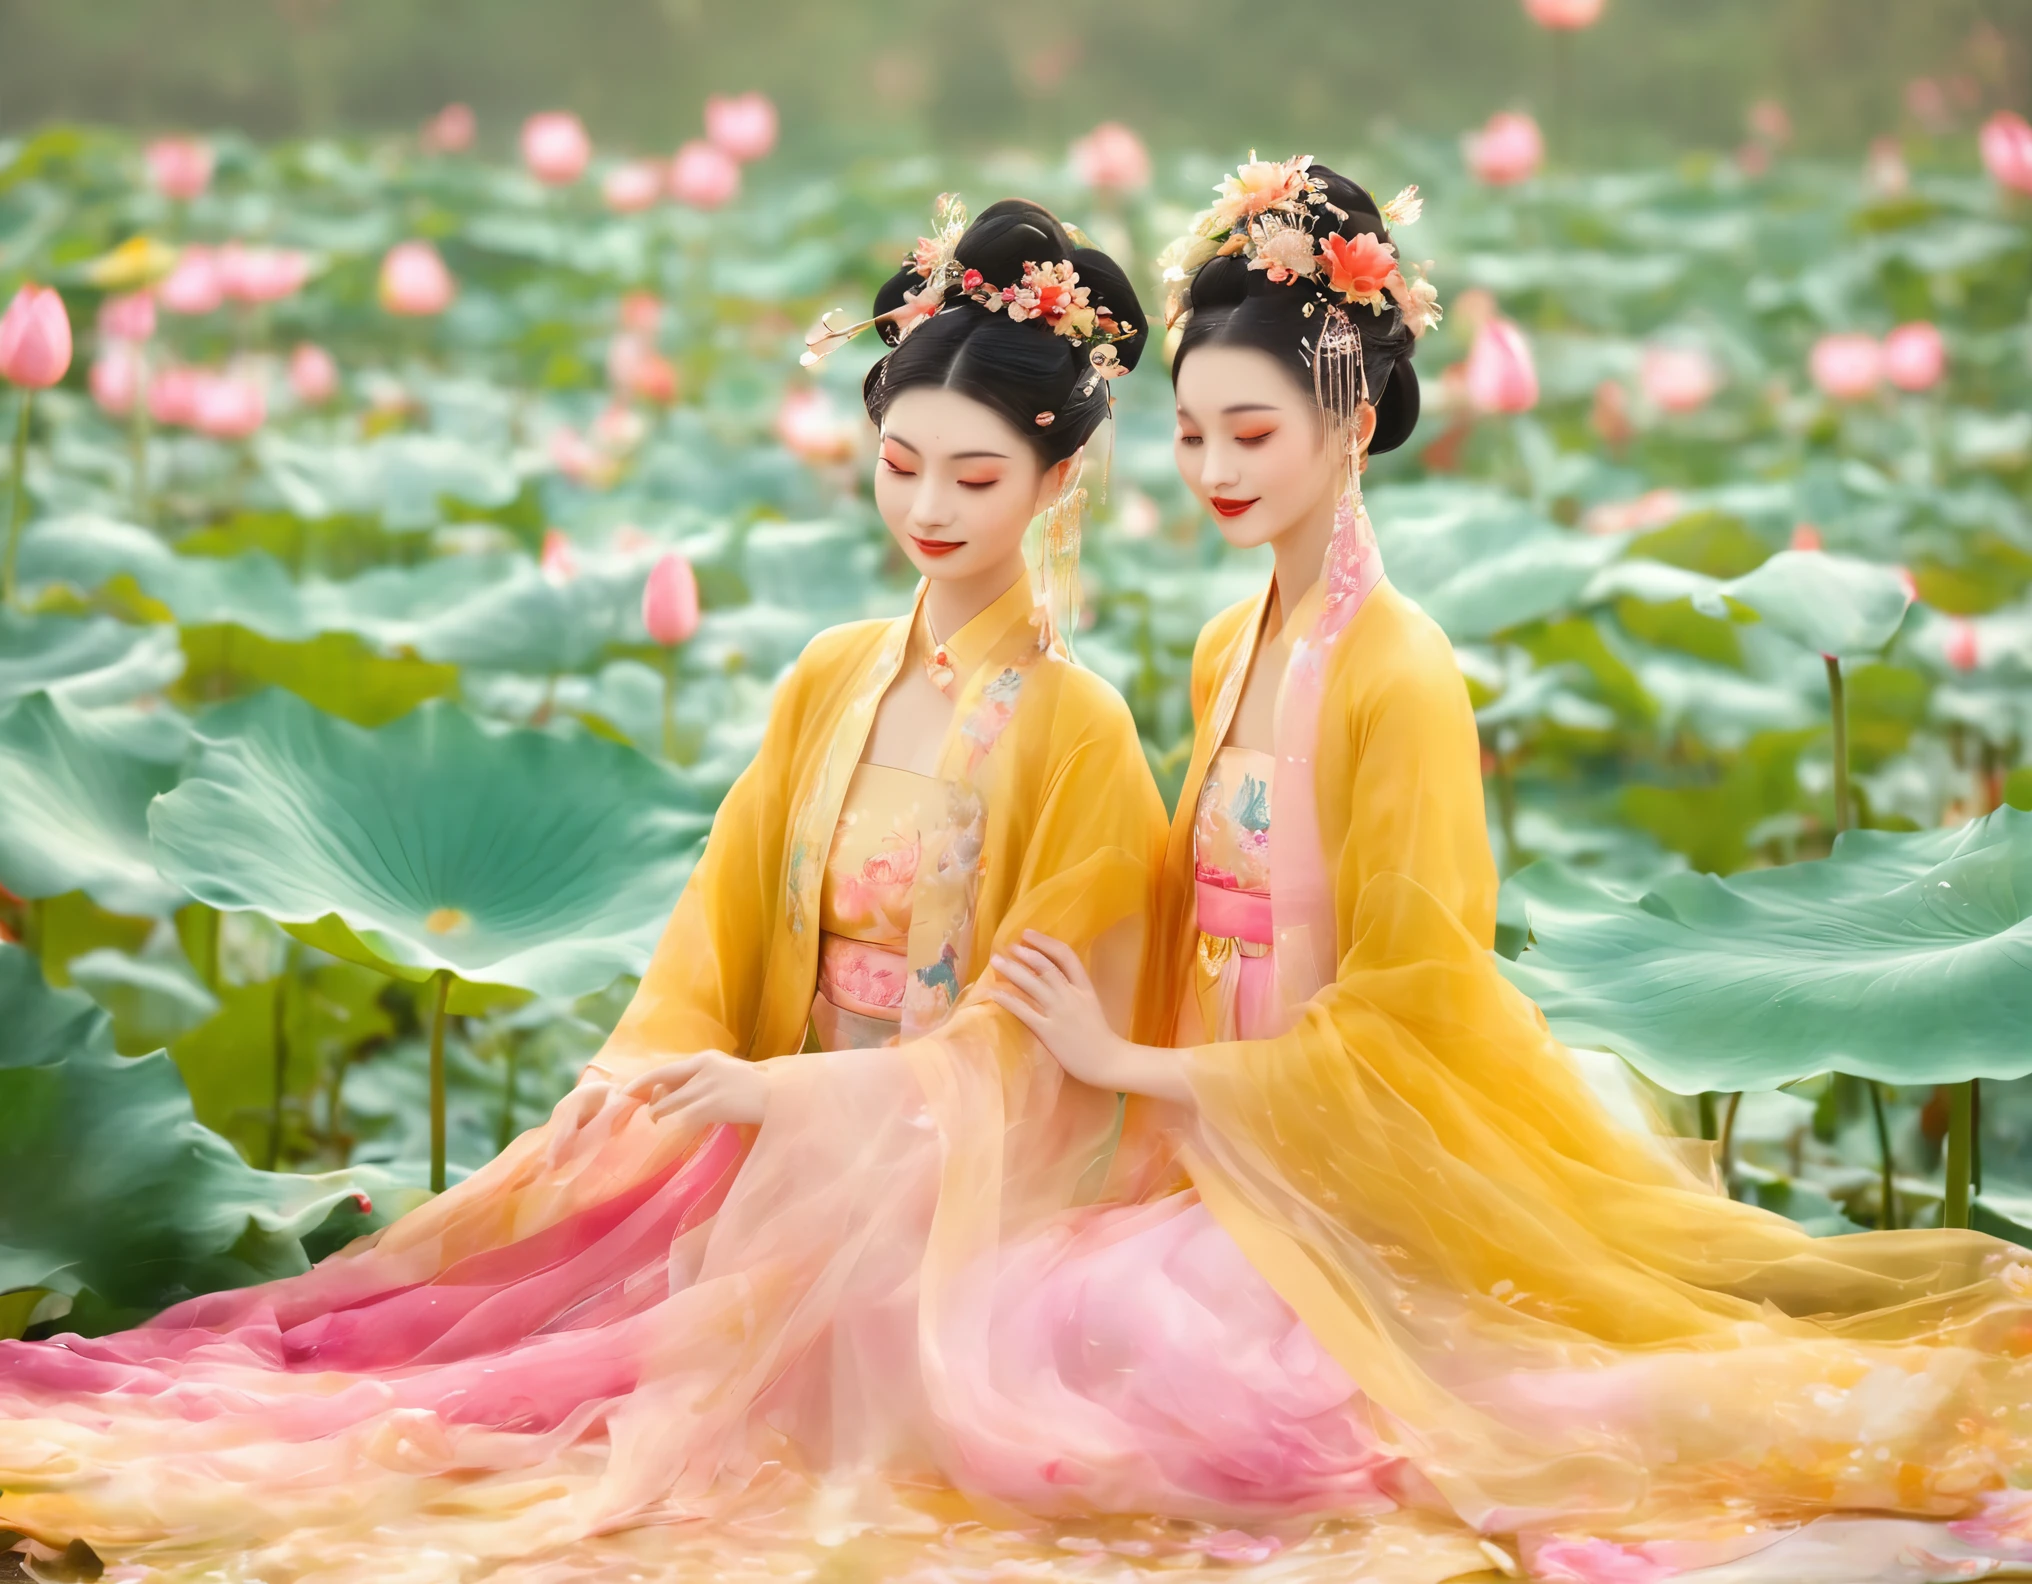 (best quality,4k,8k,highres,masterpiece:1.2),ultra-detailed,(realistic,photorealistic,photo-realistic:1.37),Couple,xianxia,lotus flower,group photo,vivid colors,physically-based rendering,sharp focus,professional,portraits,landscape,beautiful detailed eyes,beautiful detailed lips,extremely detailed eyes and face,longeyelashes,traditional xianxia outfits,golden lotus flowers blooming in the background,serene and peaceful scenery,soft, warm lighting,subtle glow illuminating the couple,faint mist adding mystical ambiance,centuries-old ancient architecture,elaborate hairstyles adorned with lotus accessories,graceful and joyful posture,perfect harmony between the couple,the couple surrounded by their loved ones,laughter and happiness filling the air,love and togetherness captured in a moment,rich textures and intricate patterns on their clothing,a picturesque scene that feels like a painting brought to life,a blend of traditional and modern elements,ethereal atmosphere,divine aura radiating from the couple,surrounded by vibrant nature,tranquil lake reflecting the beauty of the lotus flowers,crimson, pink, and golden hues creating a magical color palette,a scene that embodies the essence of xianxia culture,an enchanting and unforgettable memory immortalized in this group photo.